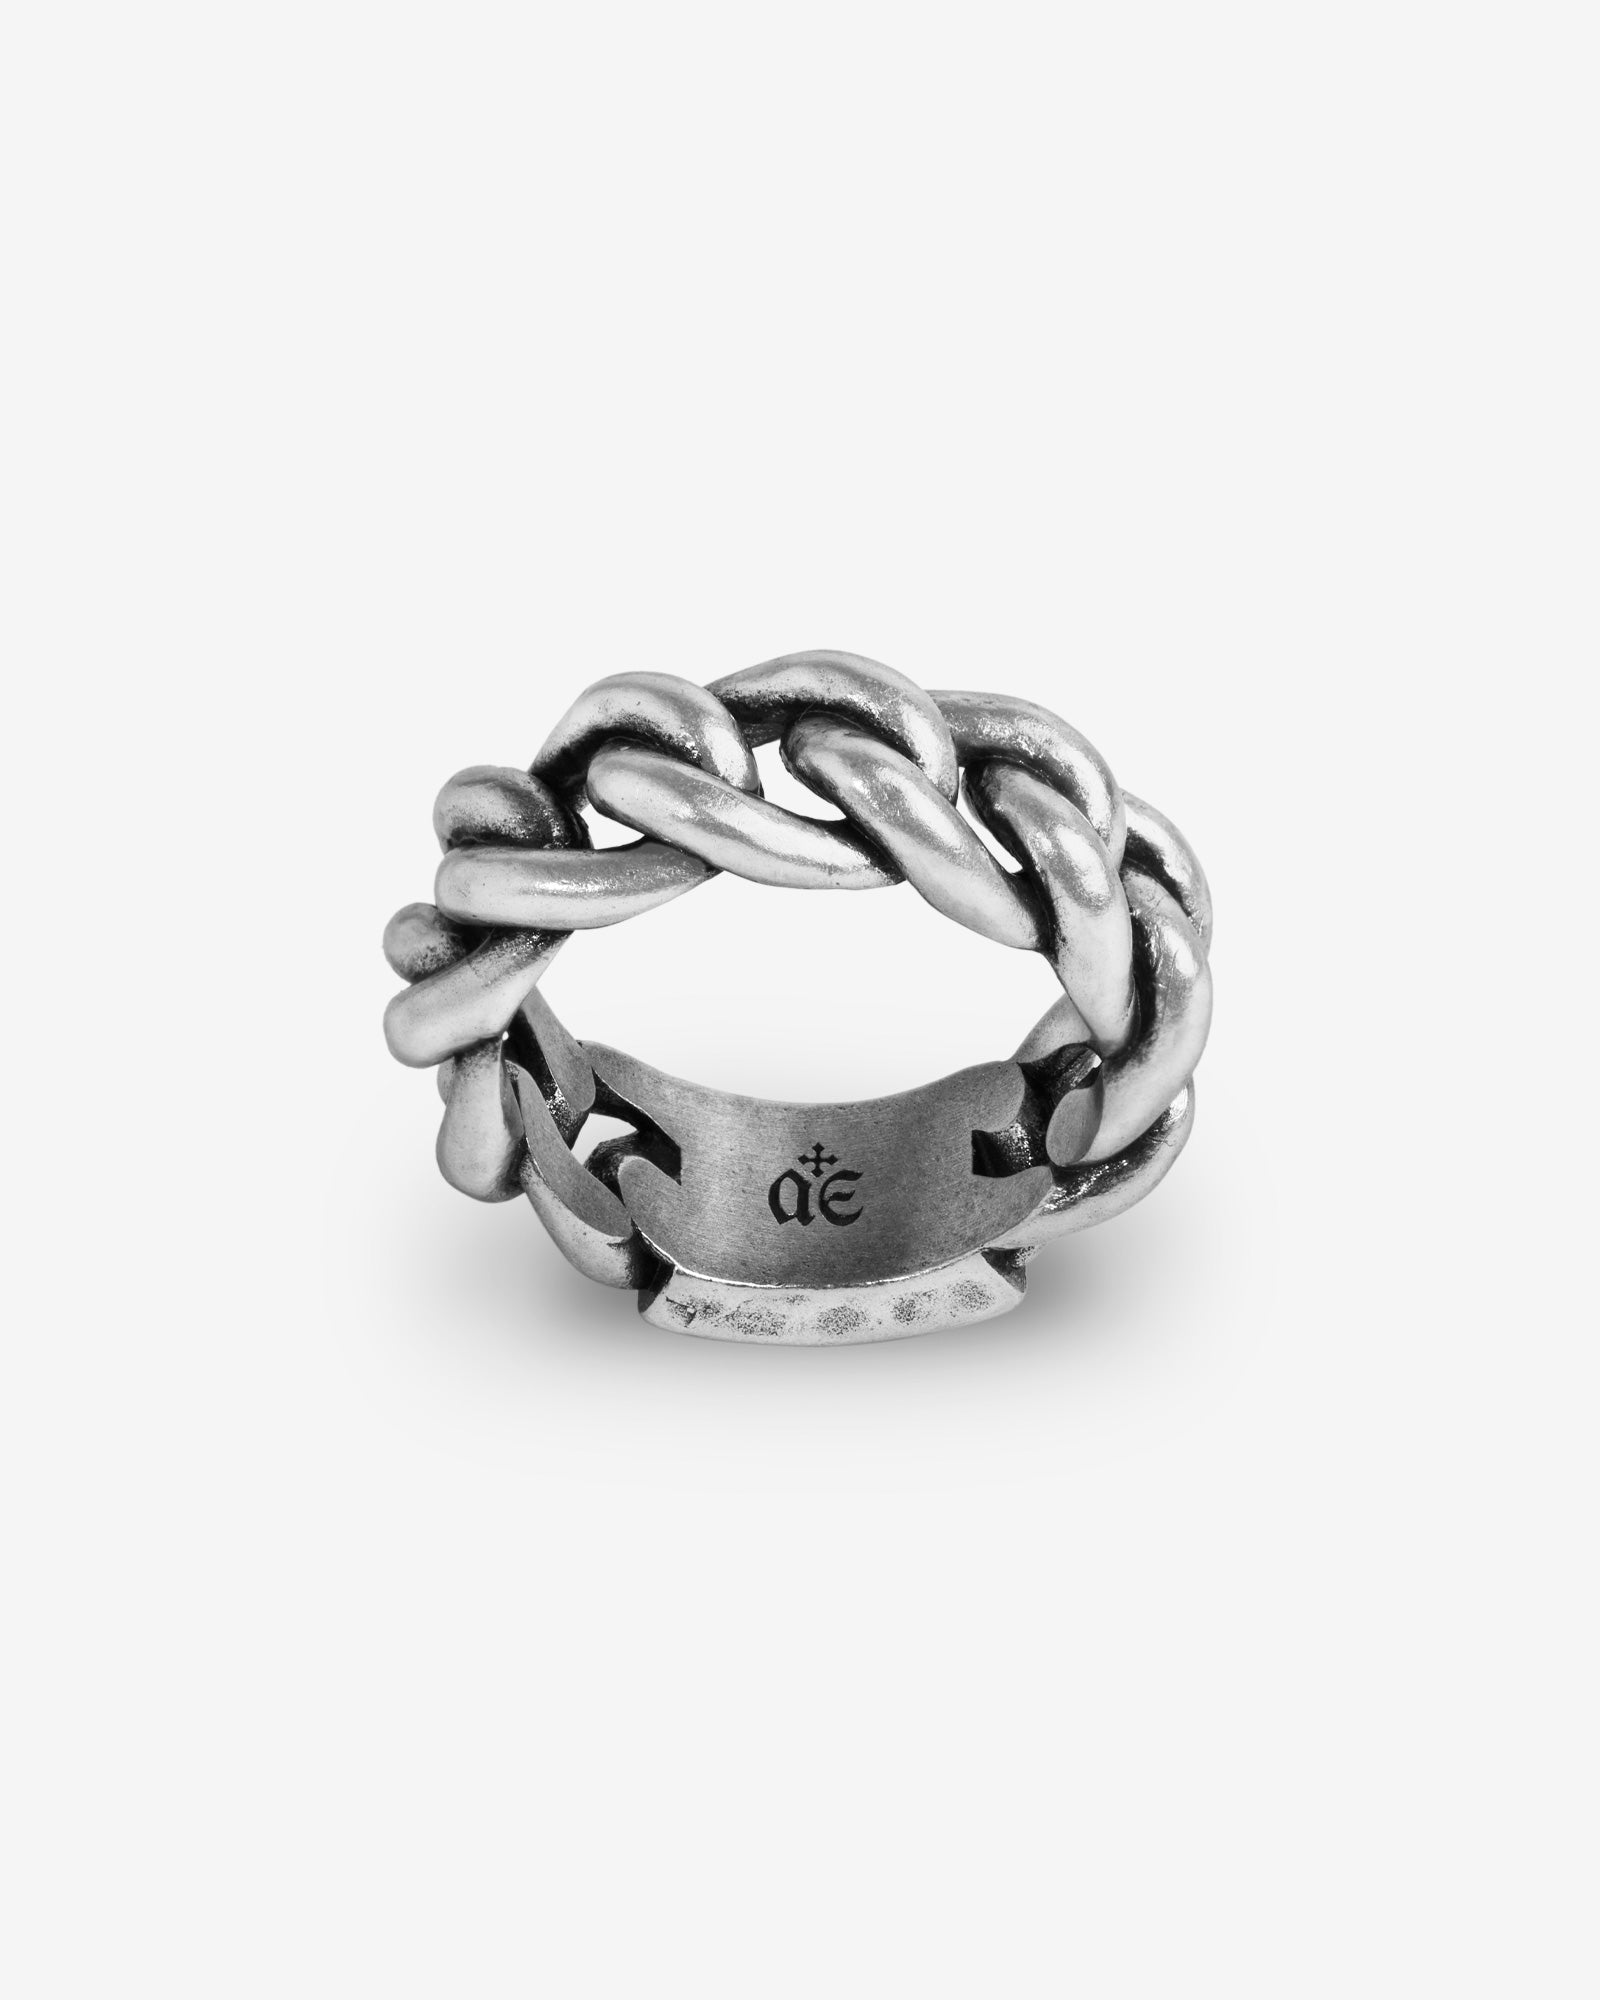 Belmont Curb Link Band Ring in Sterling Silver, 5mm | David Yurman